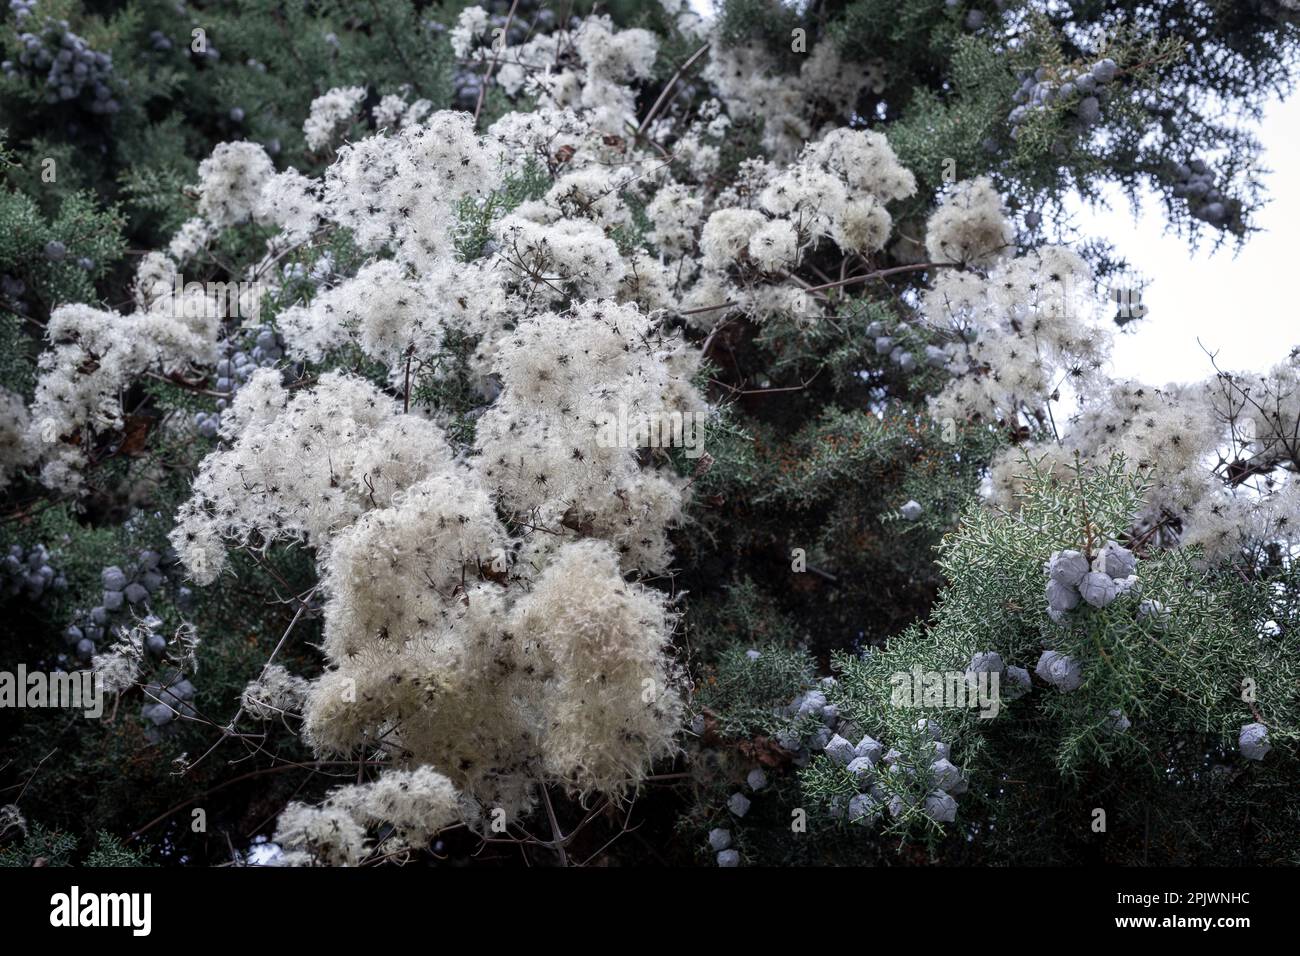 Melaleuca linariifolia. Melaleuca linariifolia is a plant in the myrtle family Myrtaceae. It is commonly known as snow-in-summer, narrow-leaved paperb Stock Photo